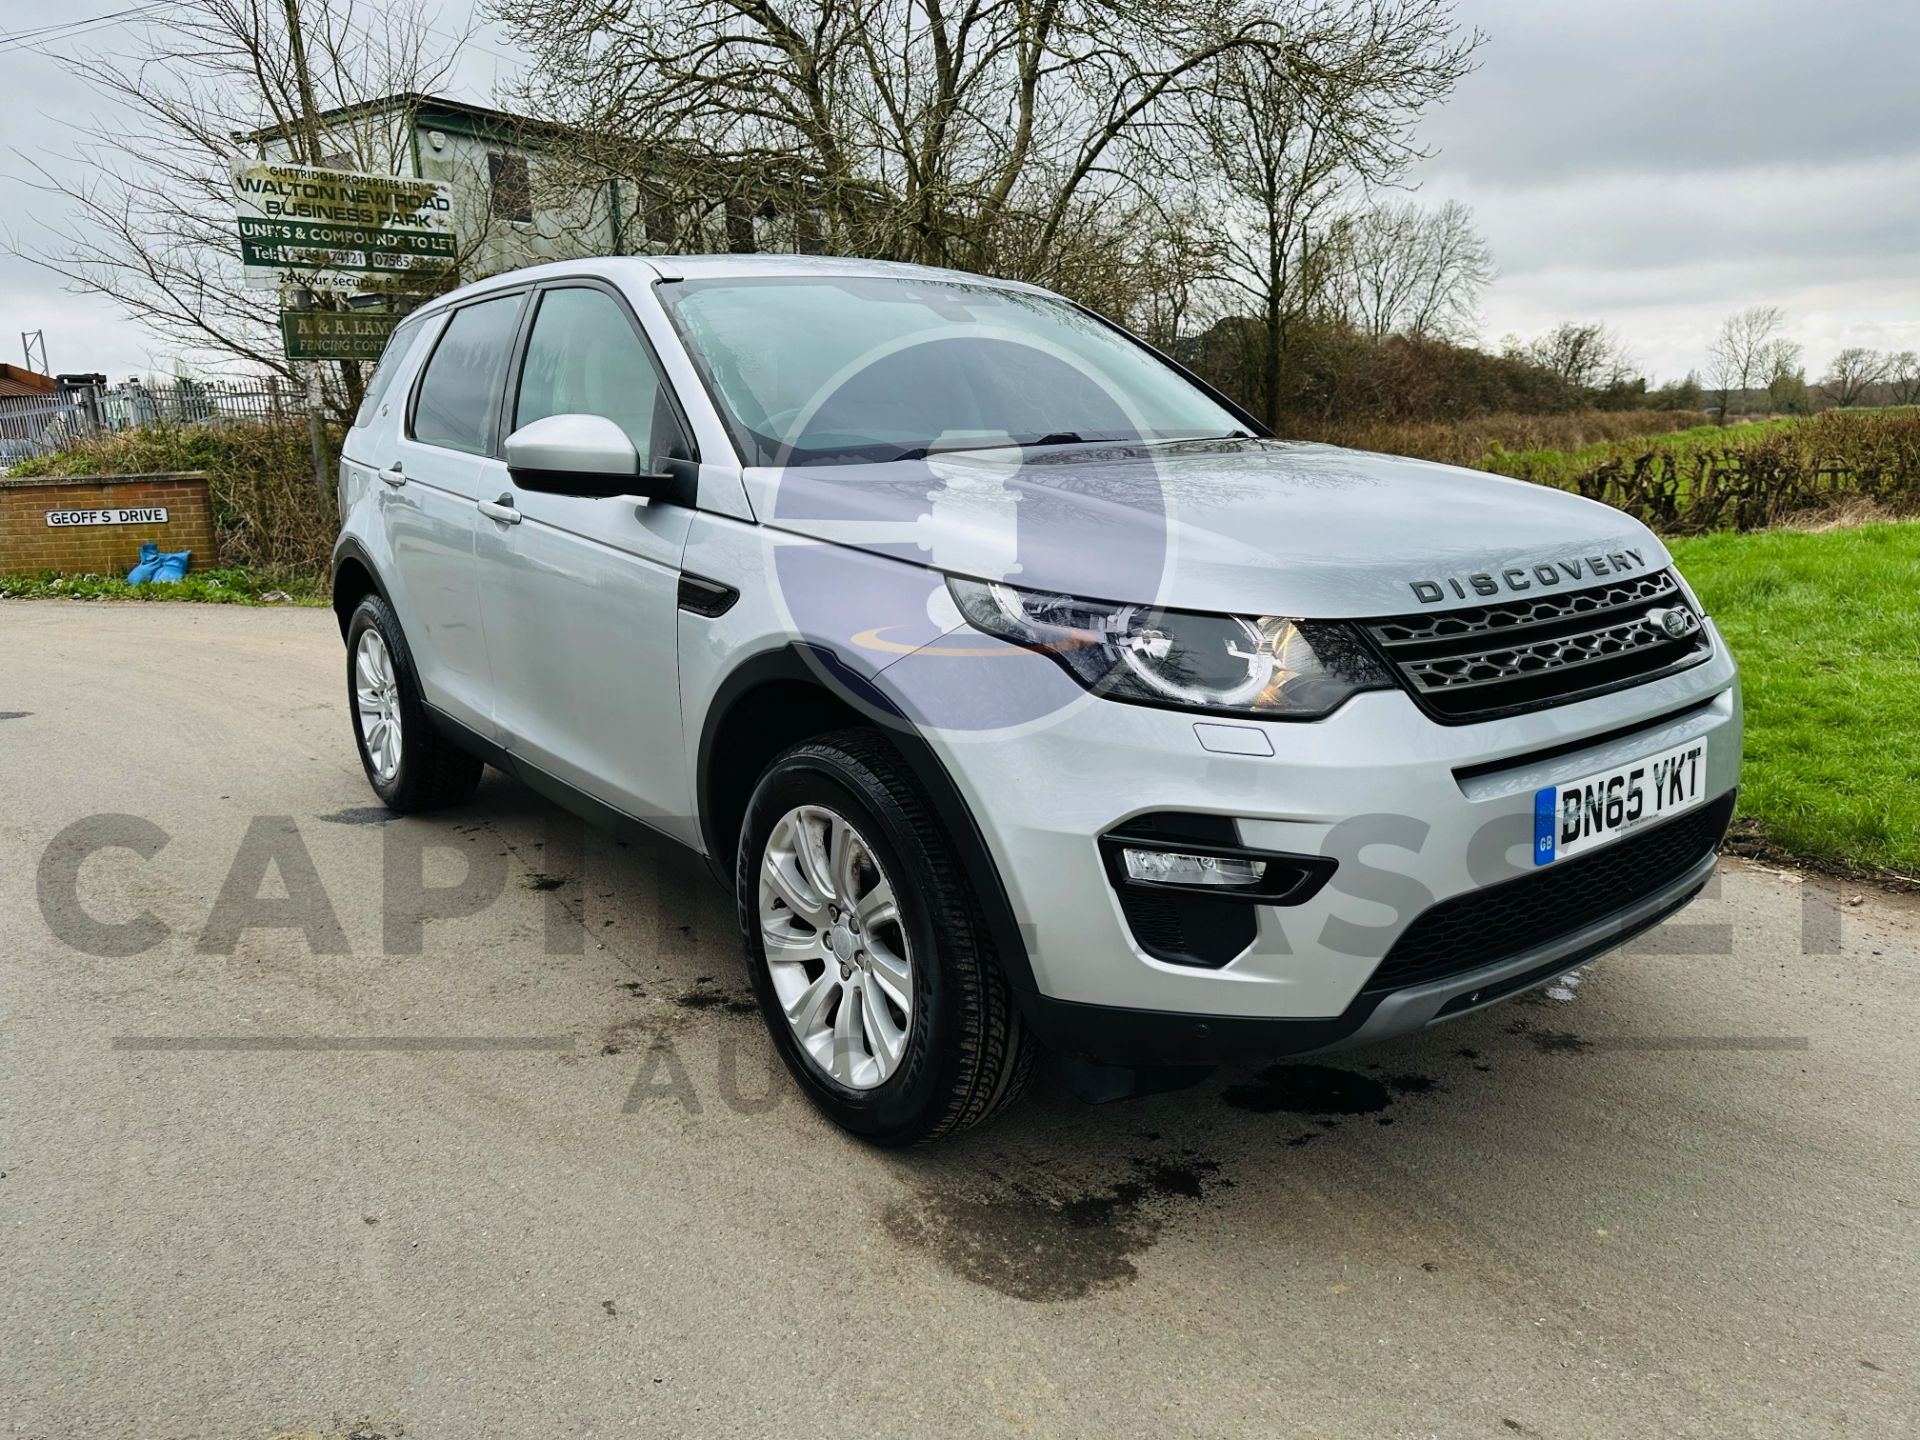 LAND ROVER DISCOVERY SPORT *SE TECH* 7 SEATER SUV (65 REG - EURO 6) 2.0 TD4 - AUTOMATIC - Image 2 of 38